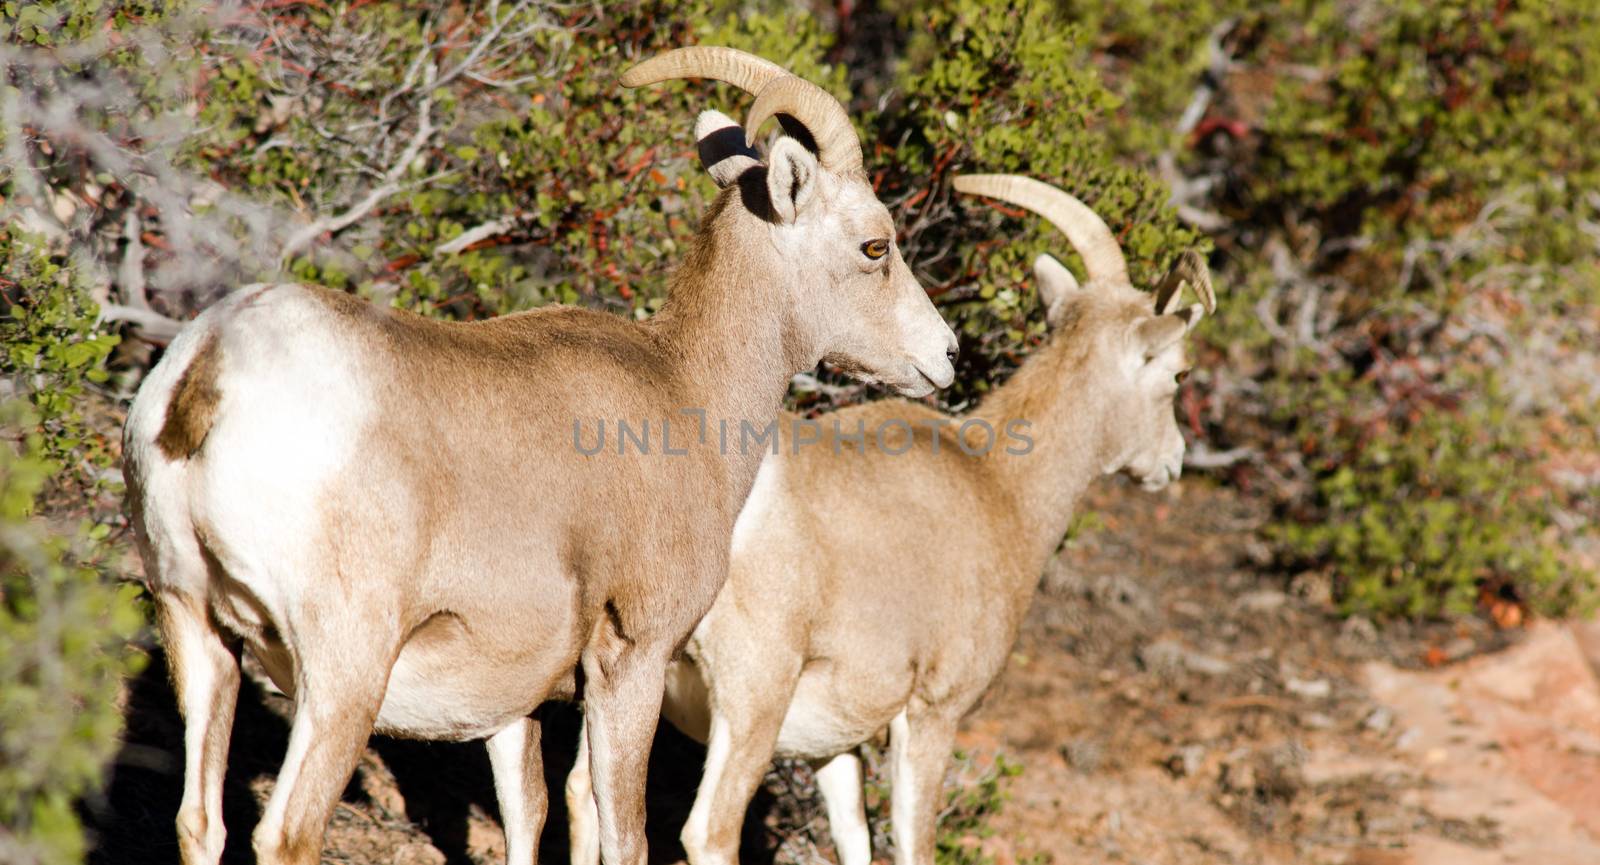 A mountain goat pair forages for food around the mountainside